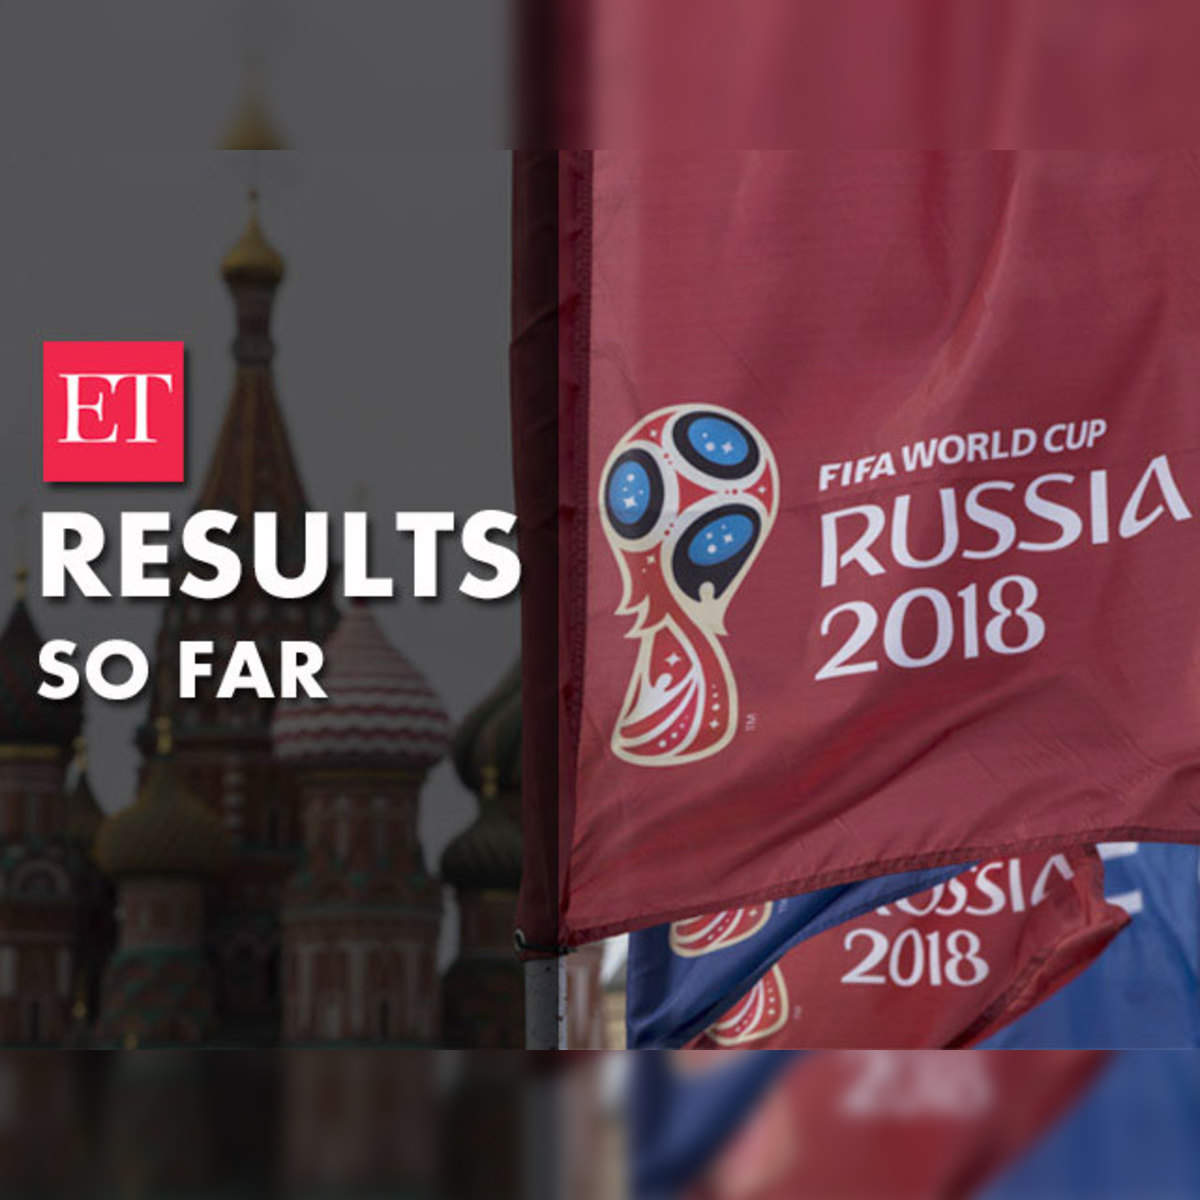 2018 FIFA World Cup schedule and results